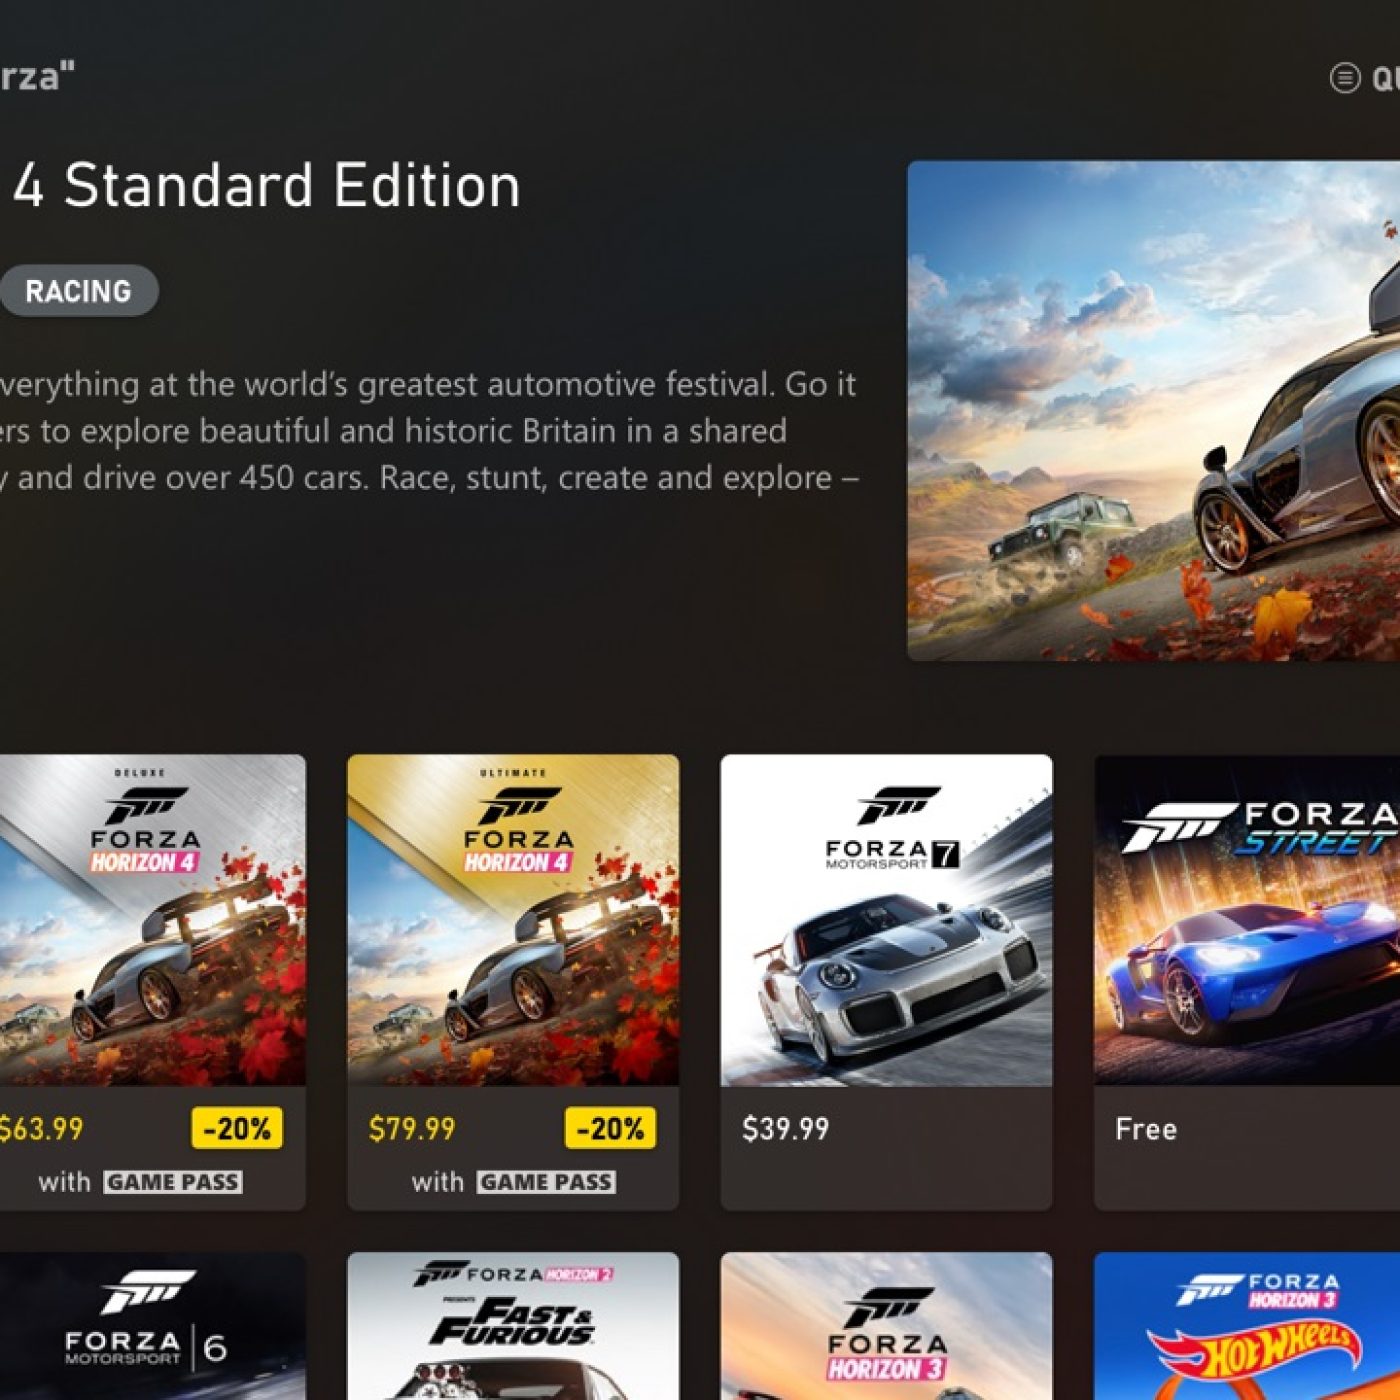 New Xbox mobile app beta lets you download games before buying them